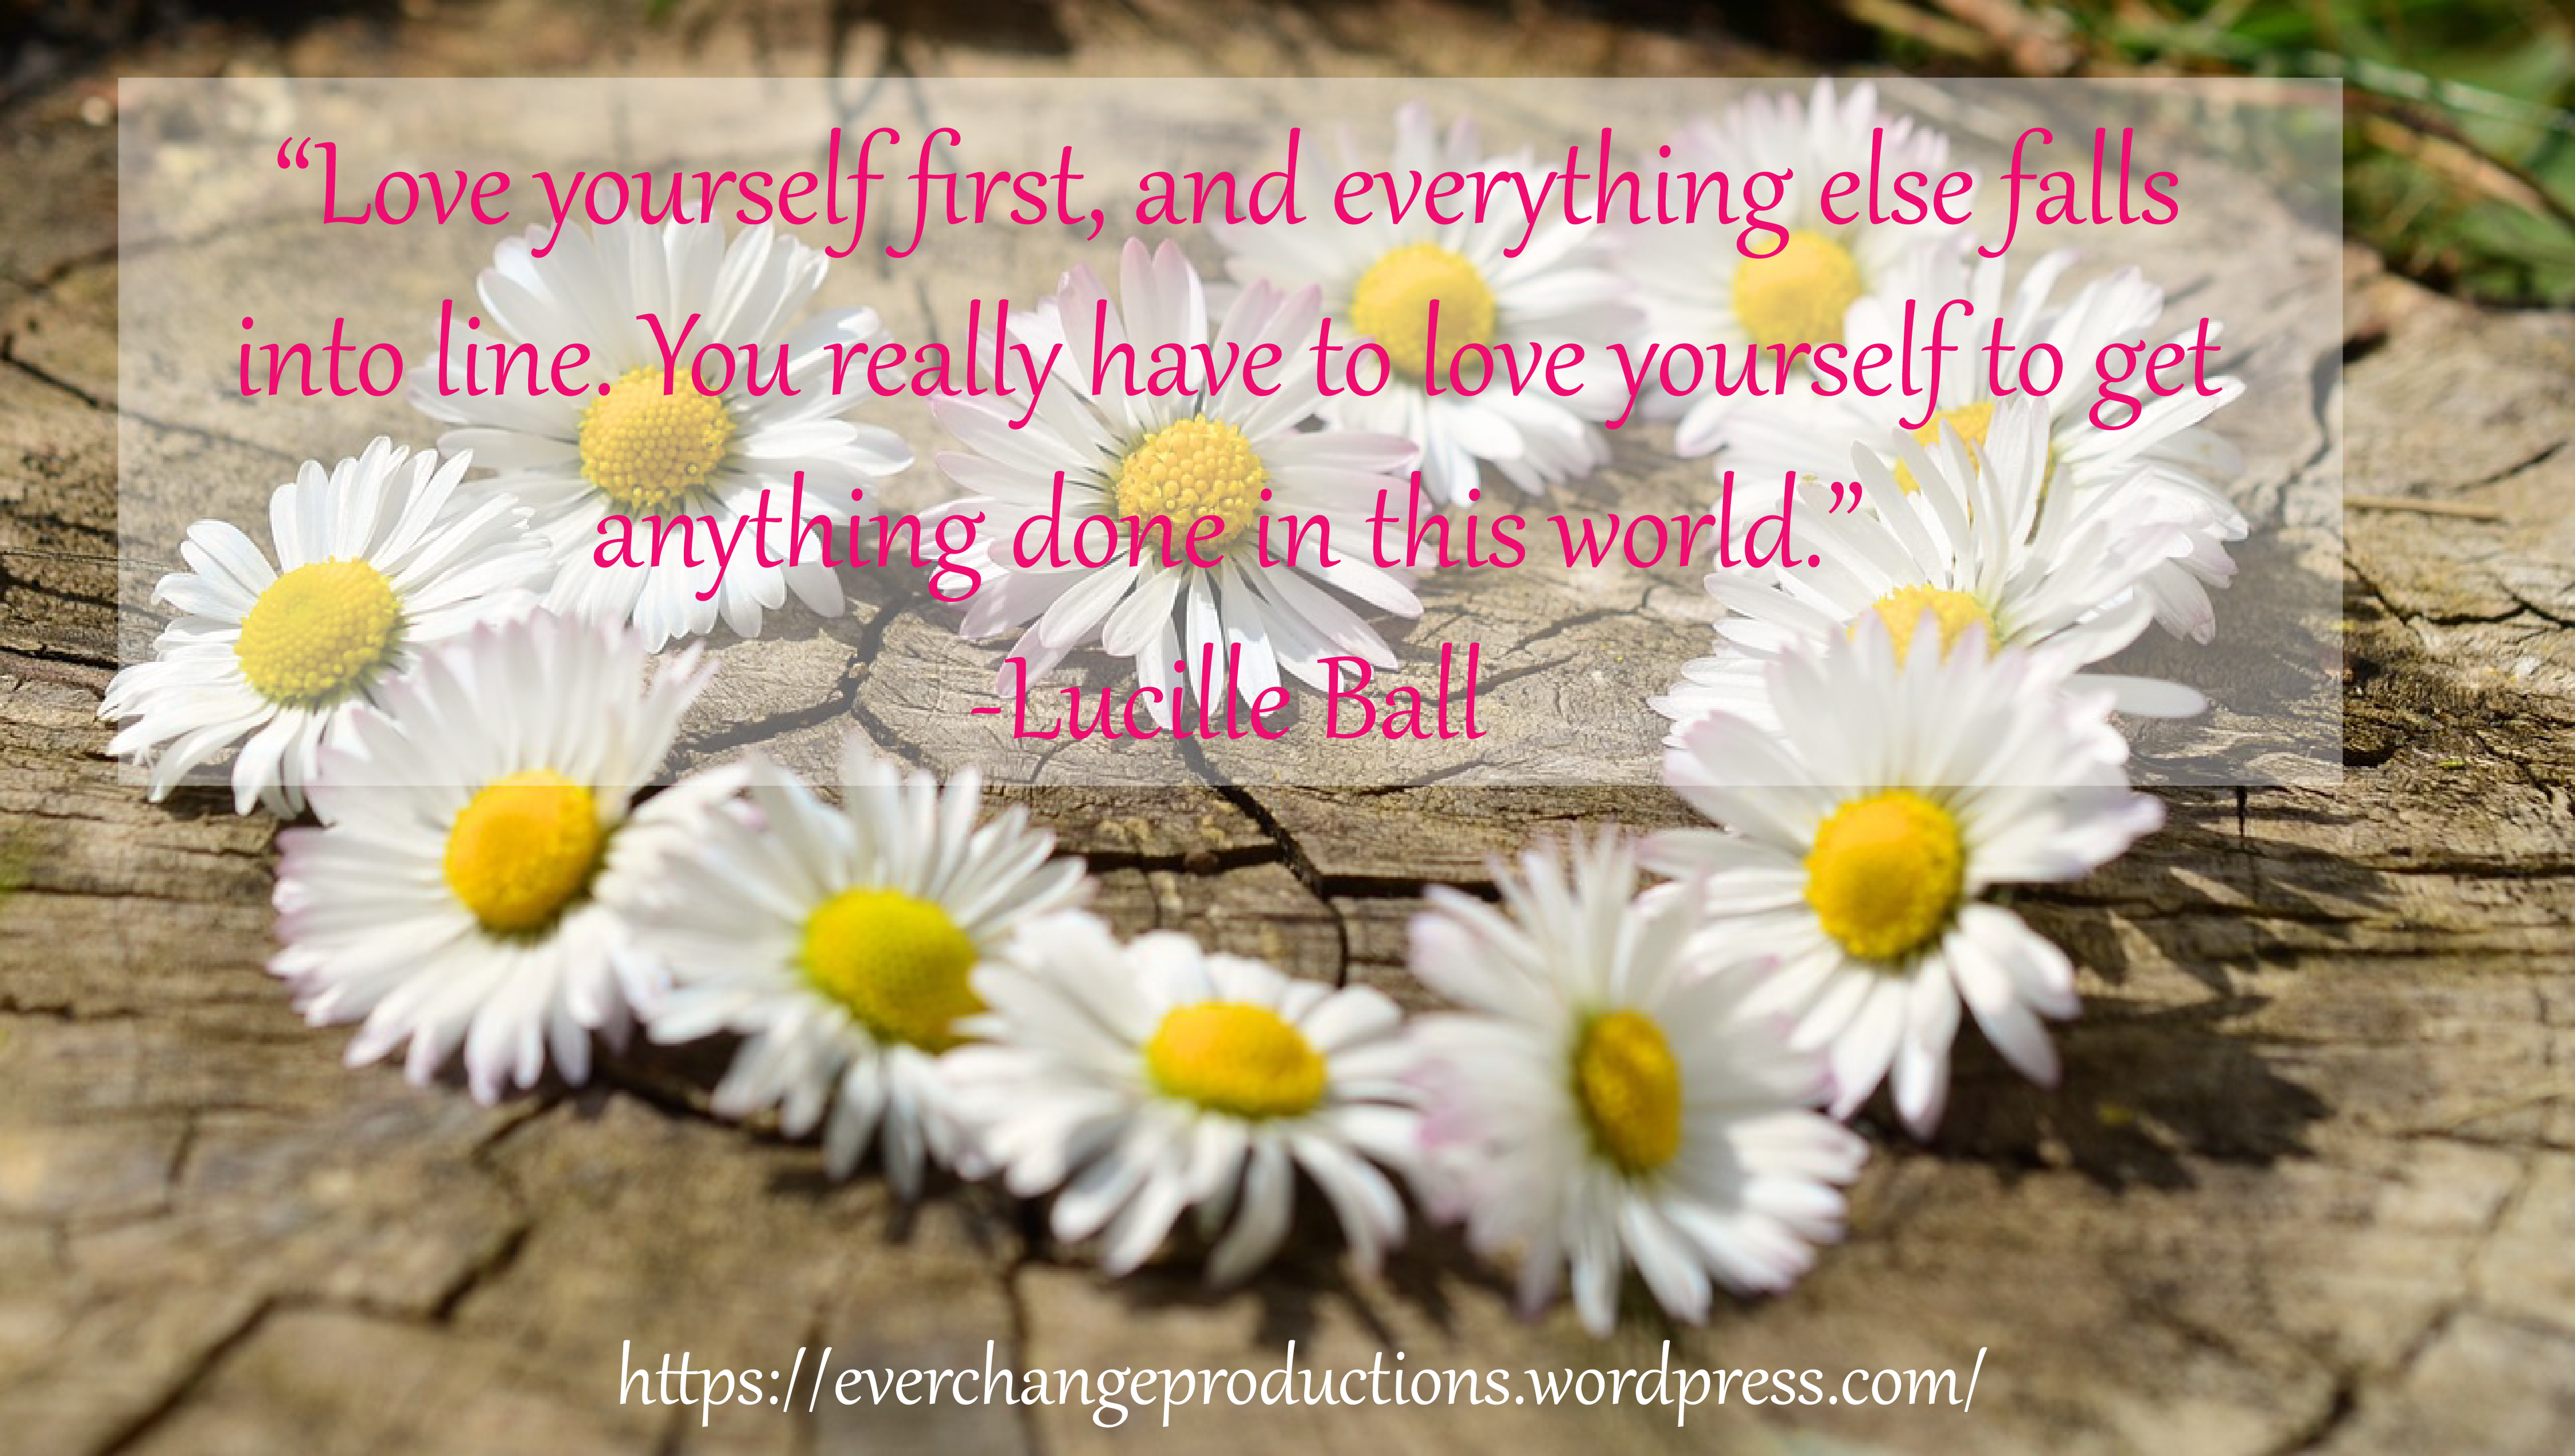 Do you need some encouragement to get you started this week? Just remember: "Love yourself first, and everything else falls into line. You really have to love yourself to get anything done in this world." -Lucille Ball inspirational quote